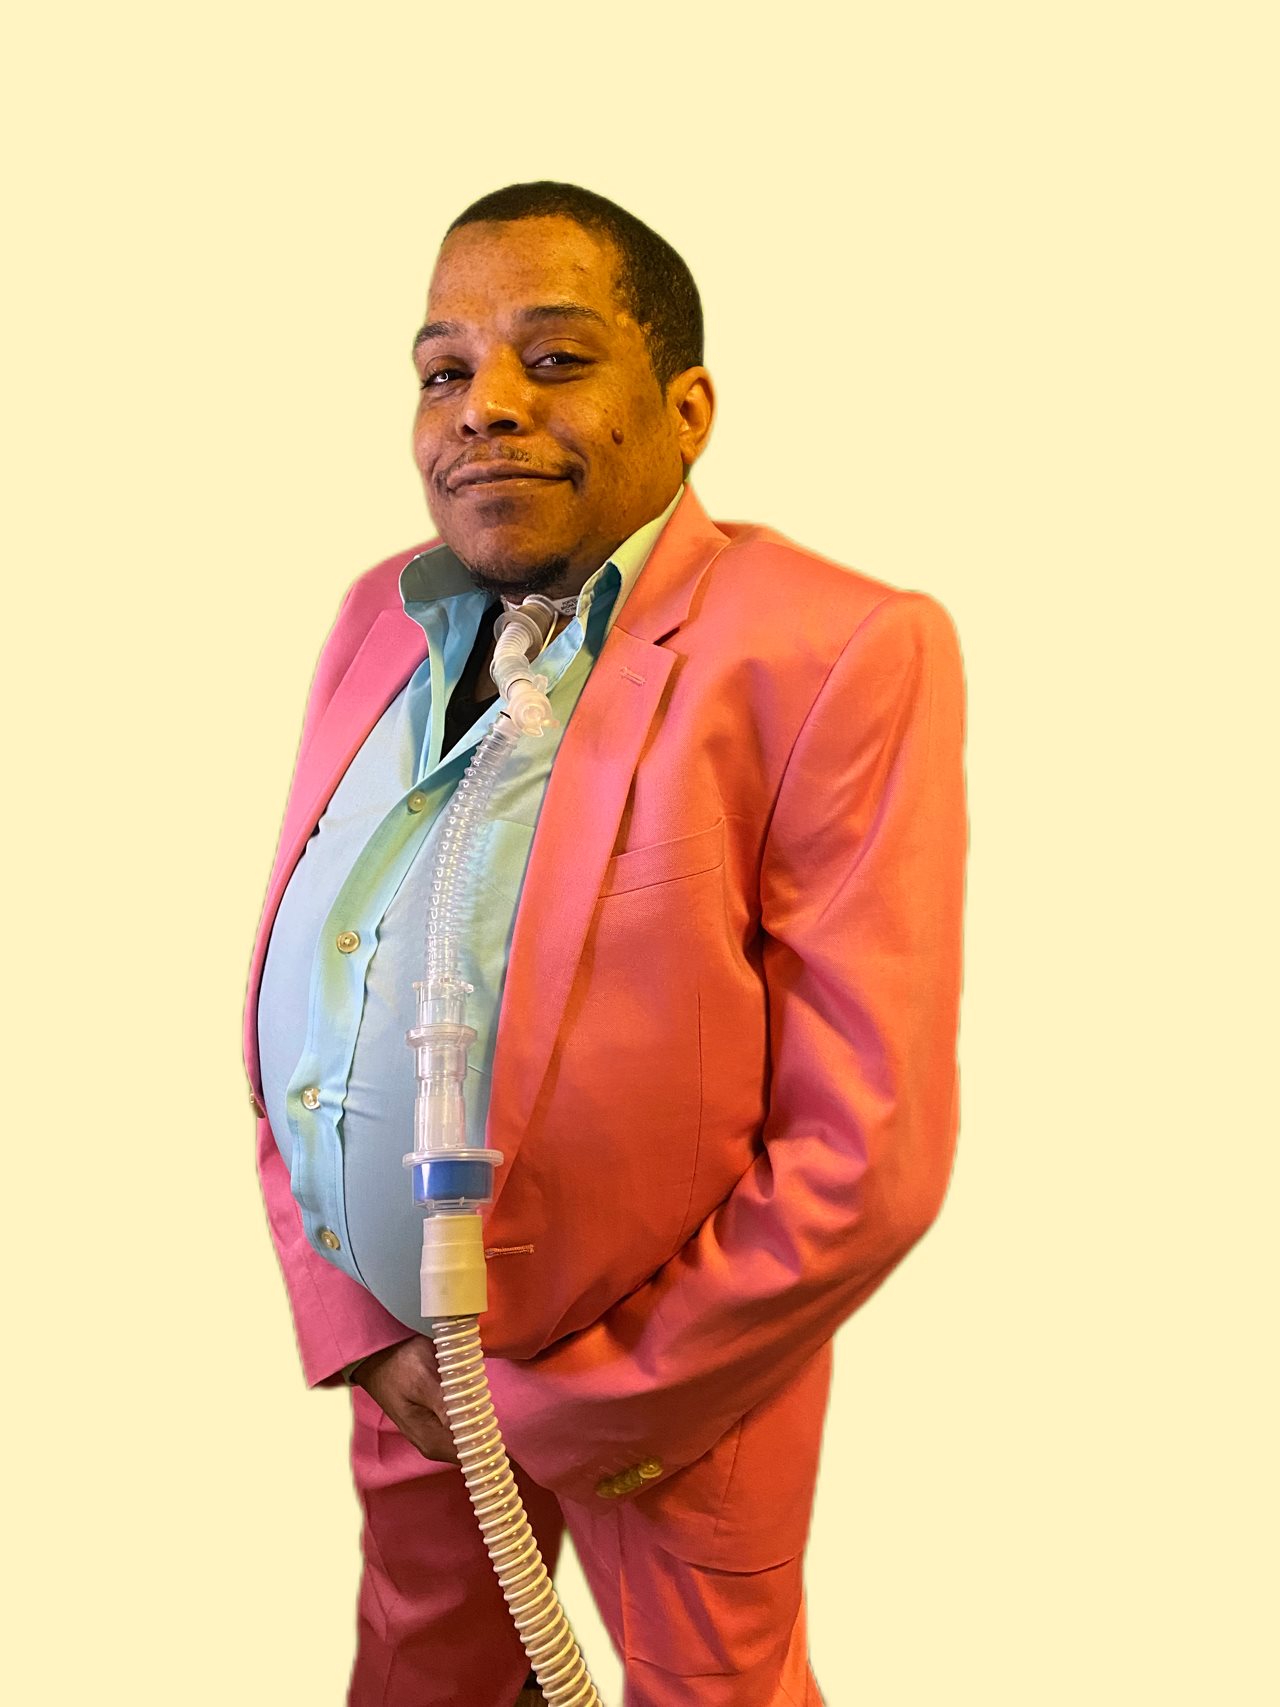 Antwan dressed in salmon colored suit and light blue shirt.